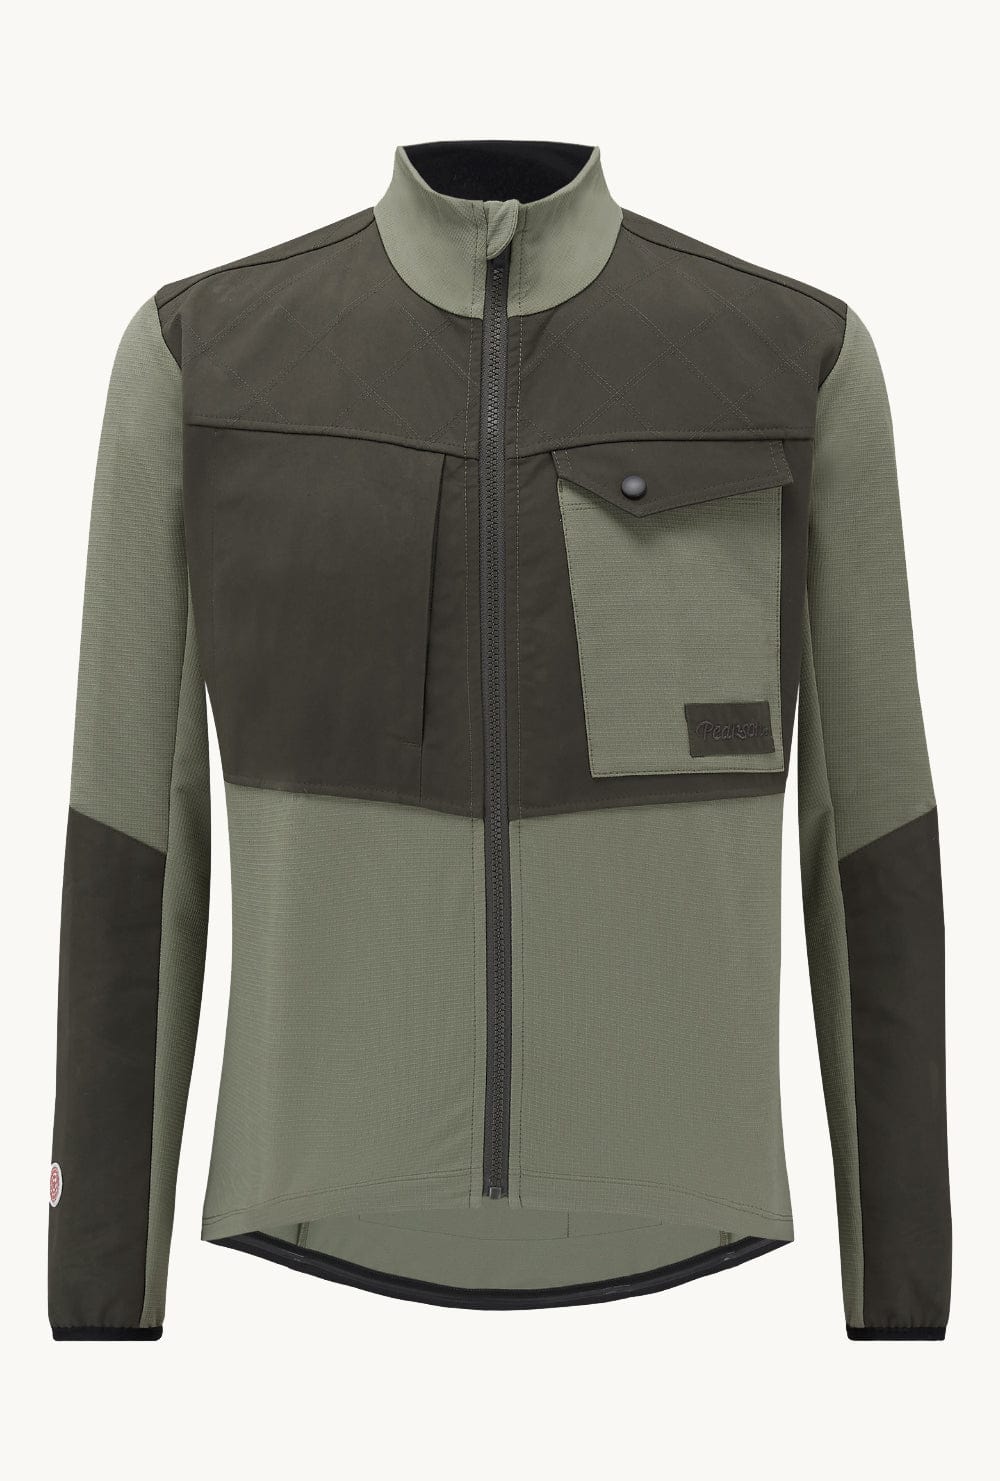 Pearson 1860  Because Its There - Green Adventure Long Sleeve Cycling Jacket  Pine Green / Small